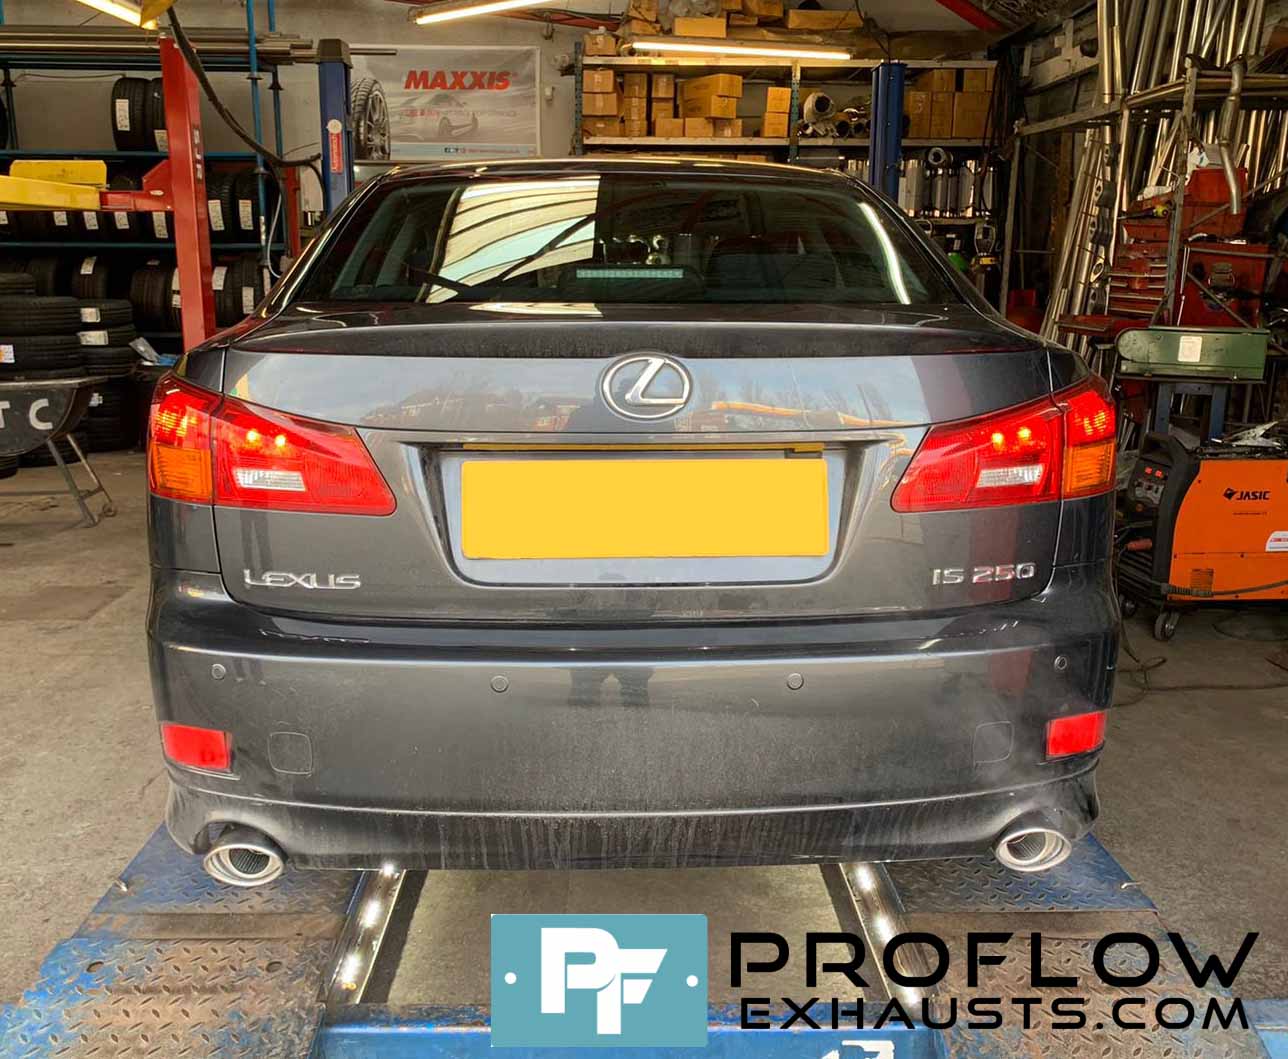 Proflow Custom Exhaust Lexus LS 250 Middle And Dual Rear Built From Stainless Steel (2)